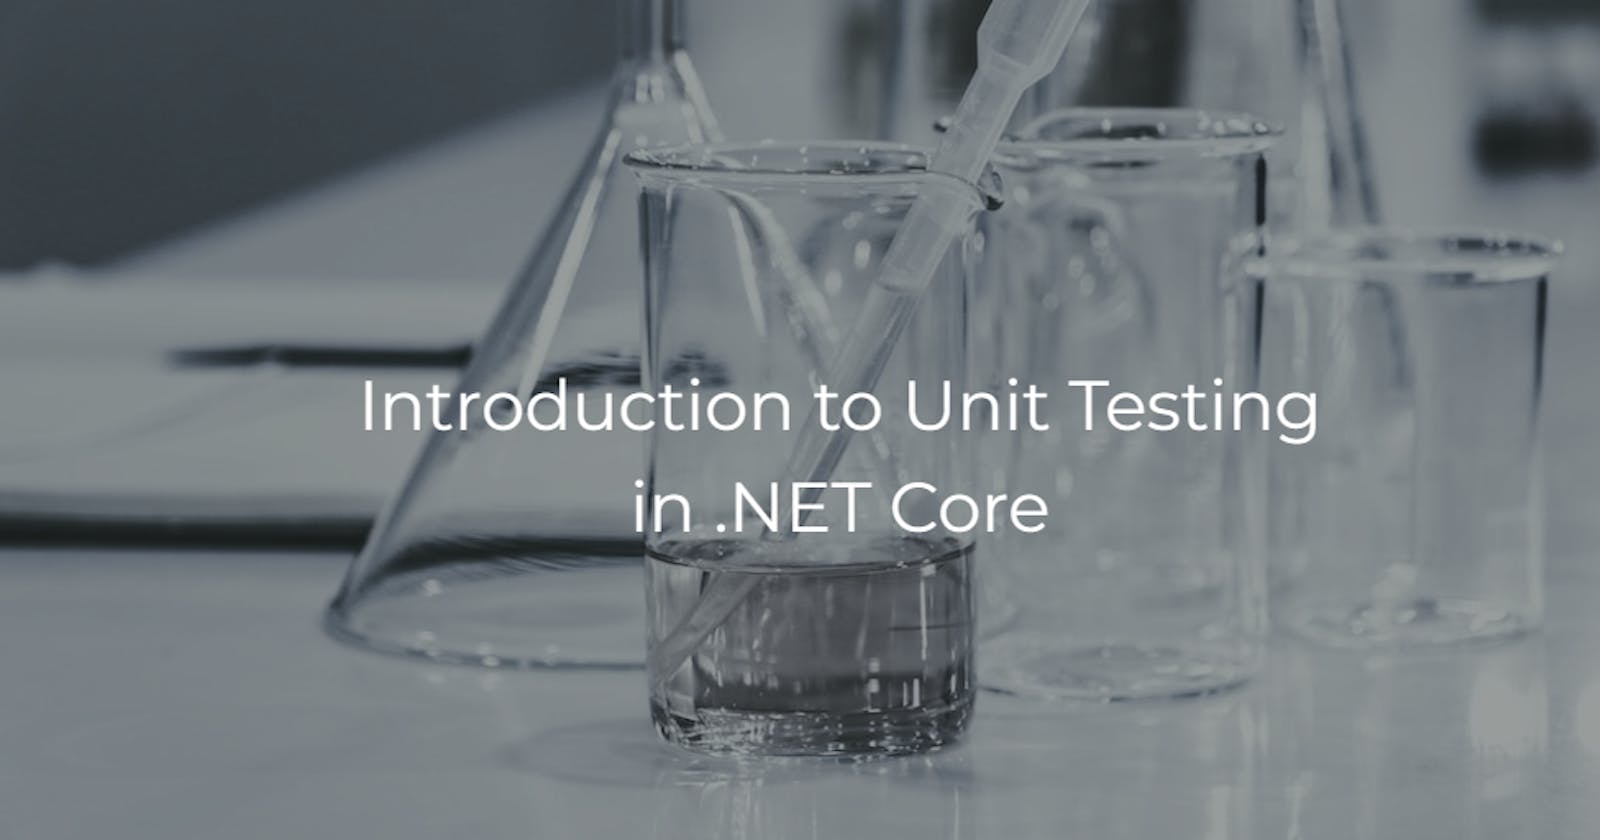 Introduction to Unit Testing in .NET Core